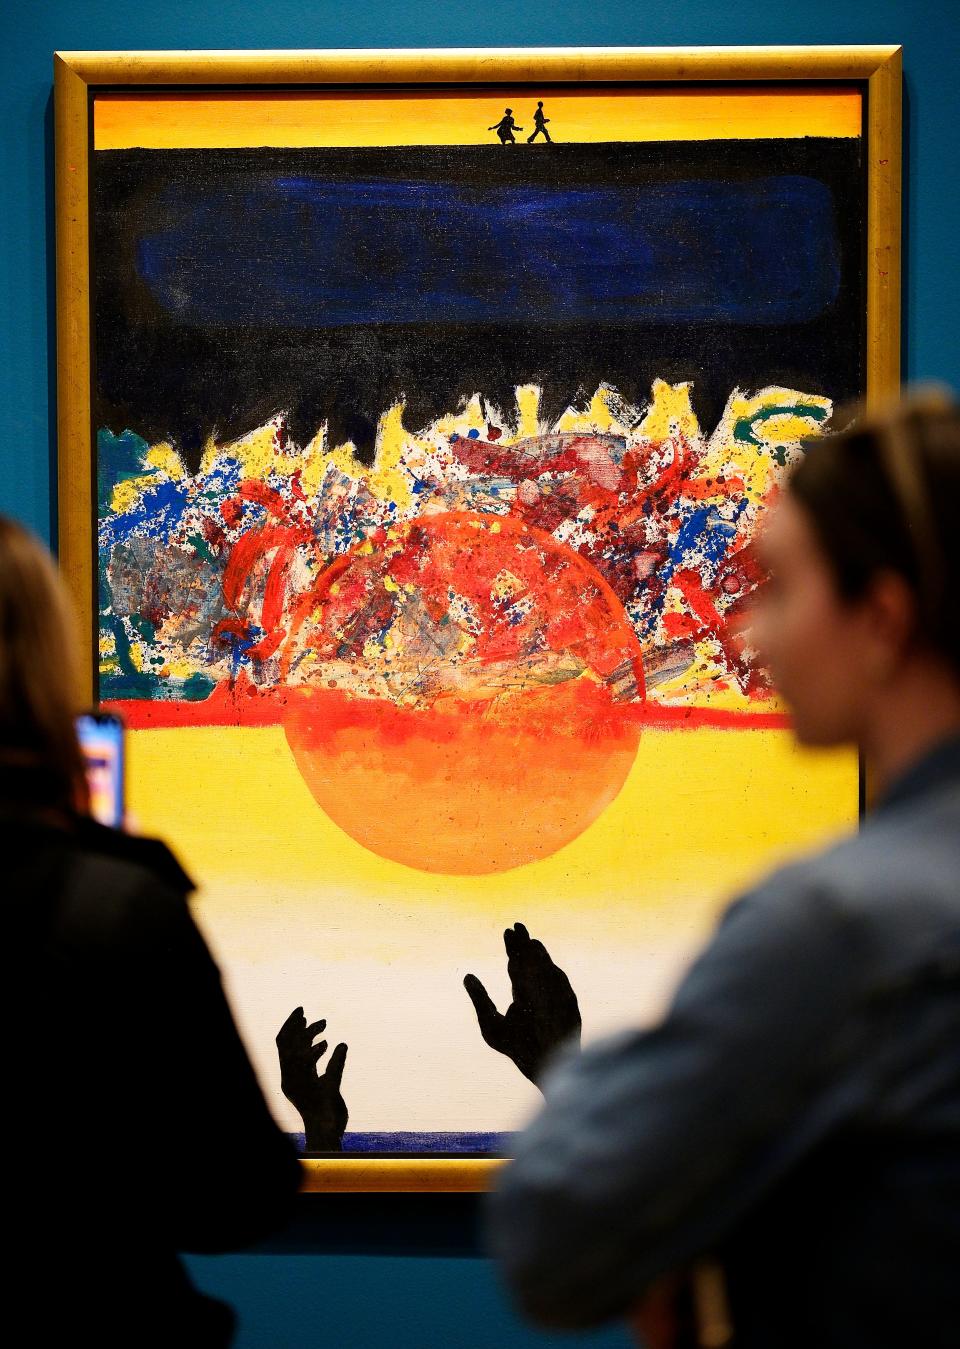 Visitors look at David C. Driskell's 1972 acrylic on canvas painting "Swing Low, Sweet Chariot" during a media tour of the special exhibition “Art and Activism at Tougaloo College" at the Oklahoma City Museum of Art on Thursday, February 16, 2023.